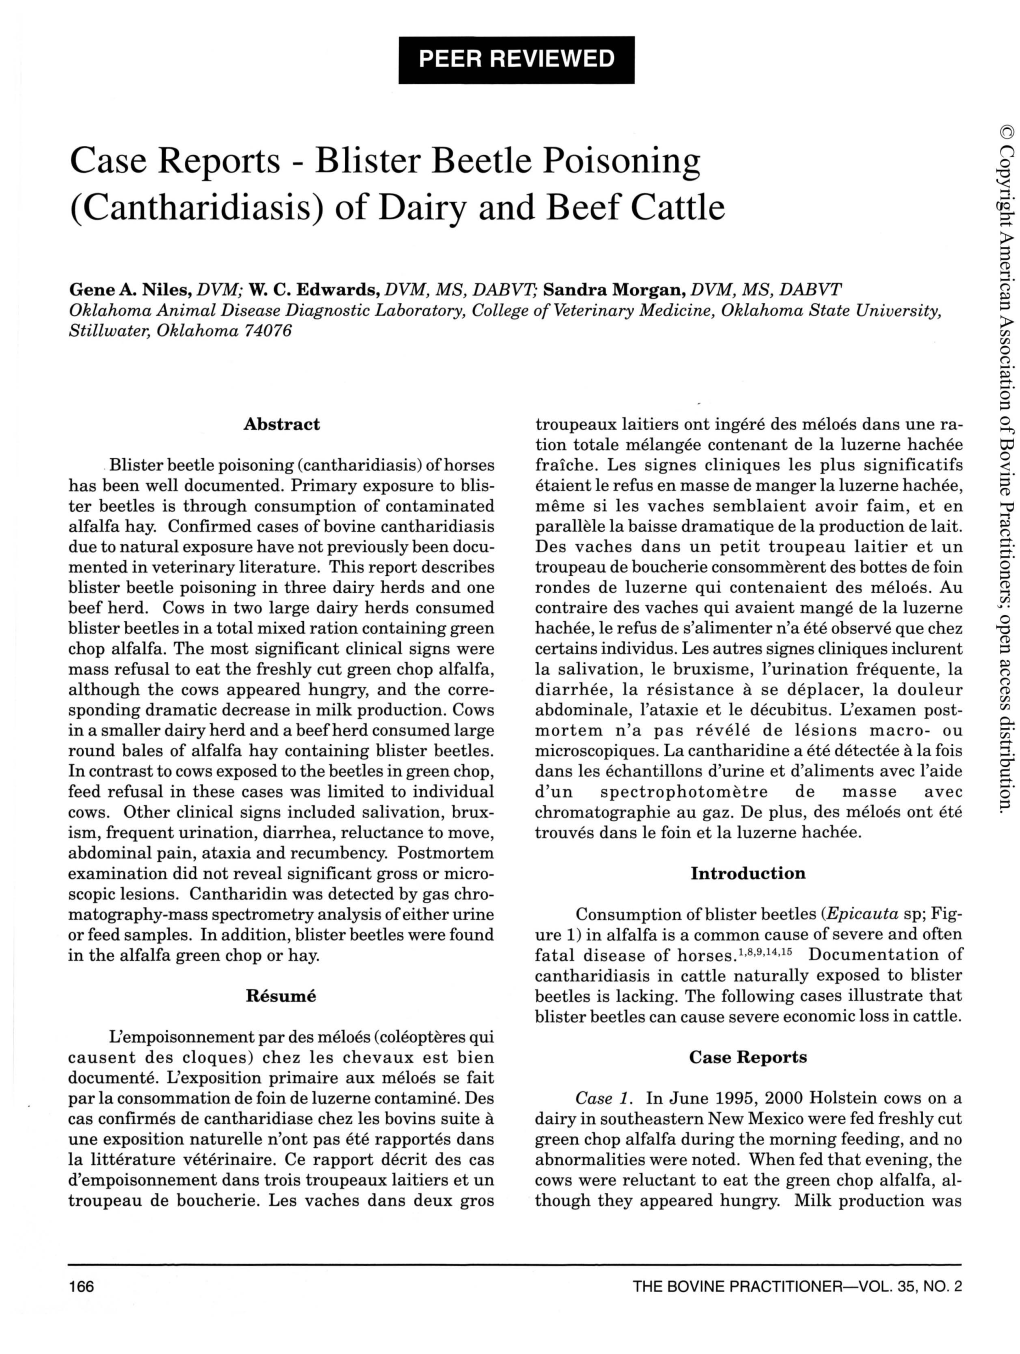 Case Reports - Blister Beetle Poisoning (Cantharidiasis) of Dairy and Beef Cattle